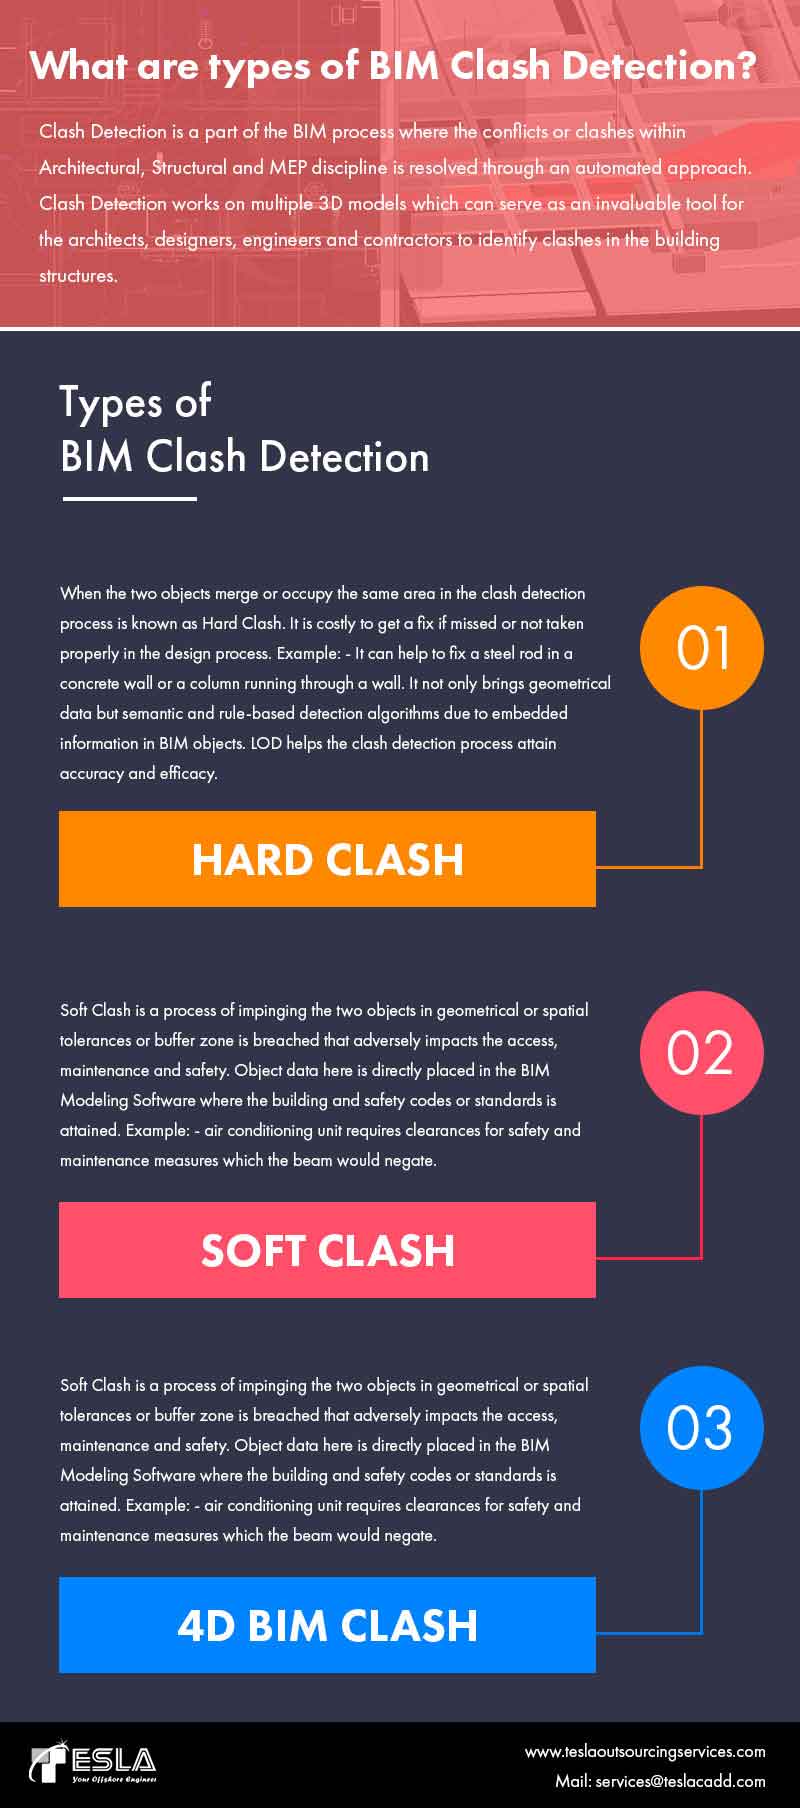 What are Types of BIM Clash Detection?